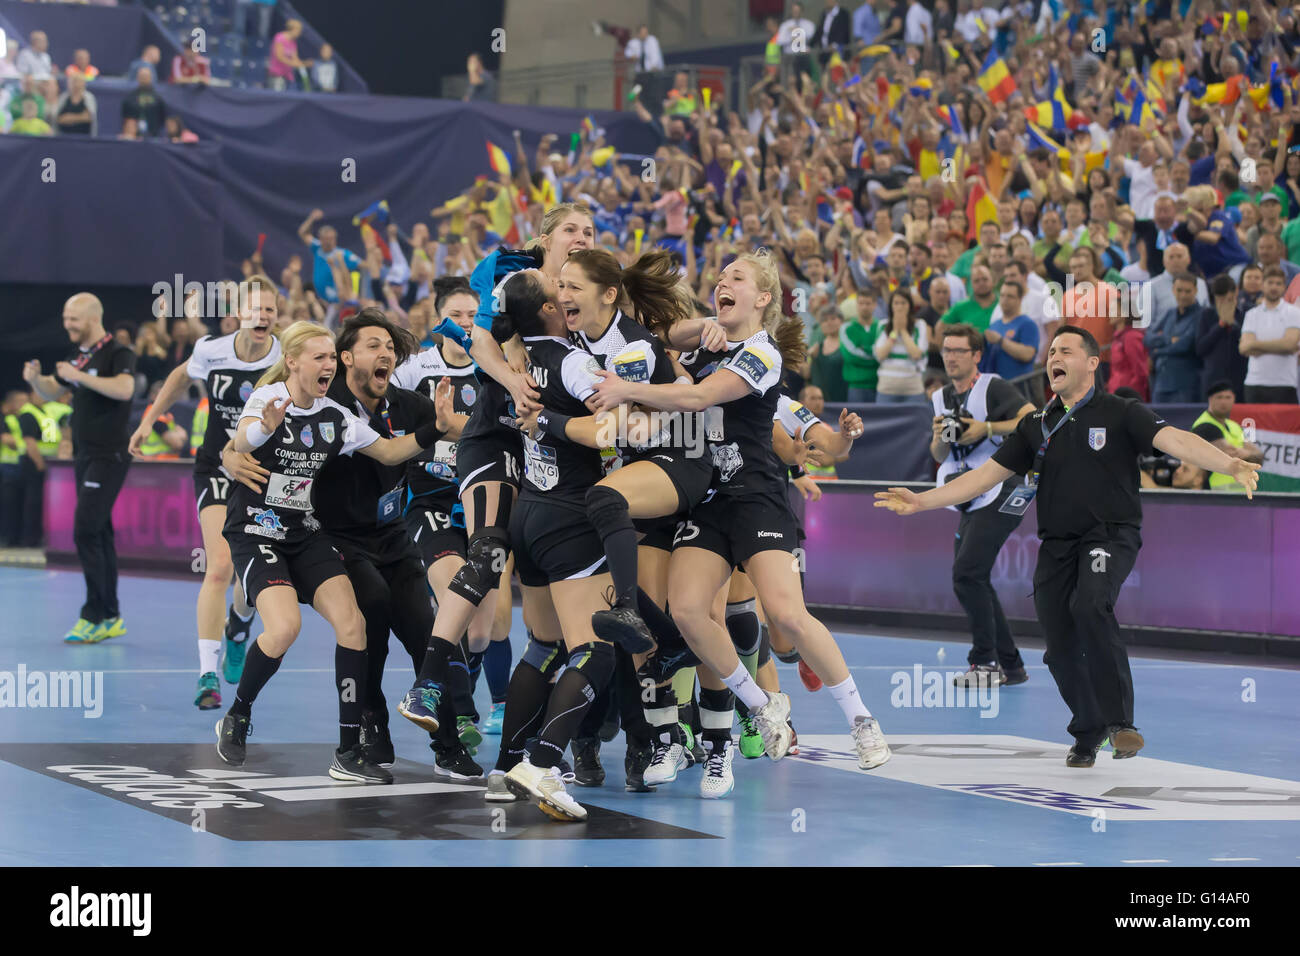 Budapest, Hungary. 8th May, 2016. Members of Romania's CSM Bucuresti celebrate their victory in the Women'EHF Champions League Final Four competition against Hungary's Gyori Audi ETO KC at the Papp Laszlo Sports Arena in Budapest, Hungary, May 8, 2016. © Attila Volgyi/Xinhua/Alamy Live News Stock Photo